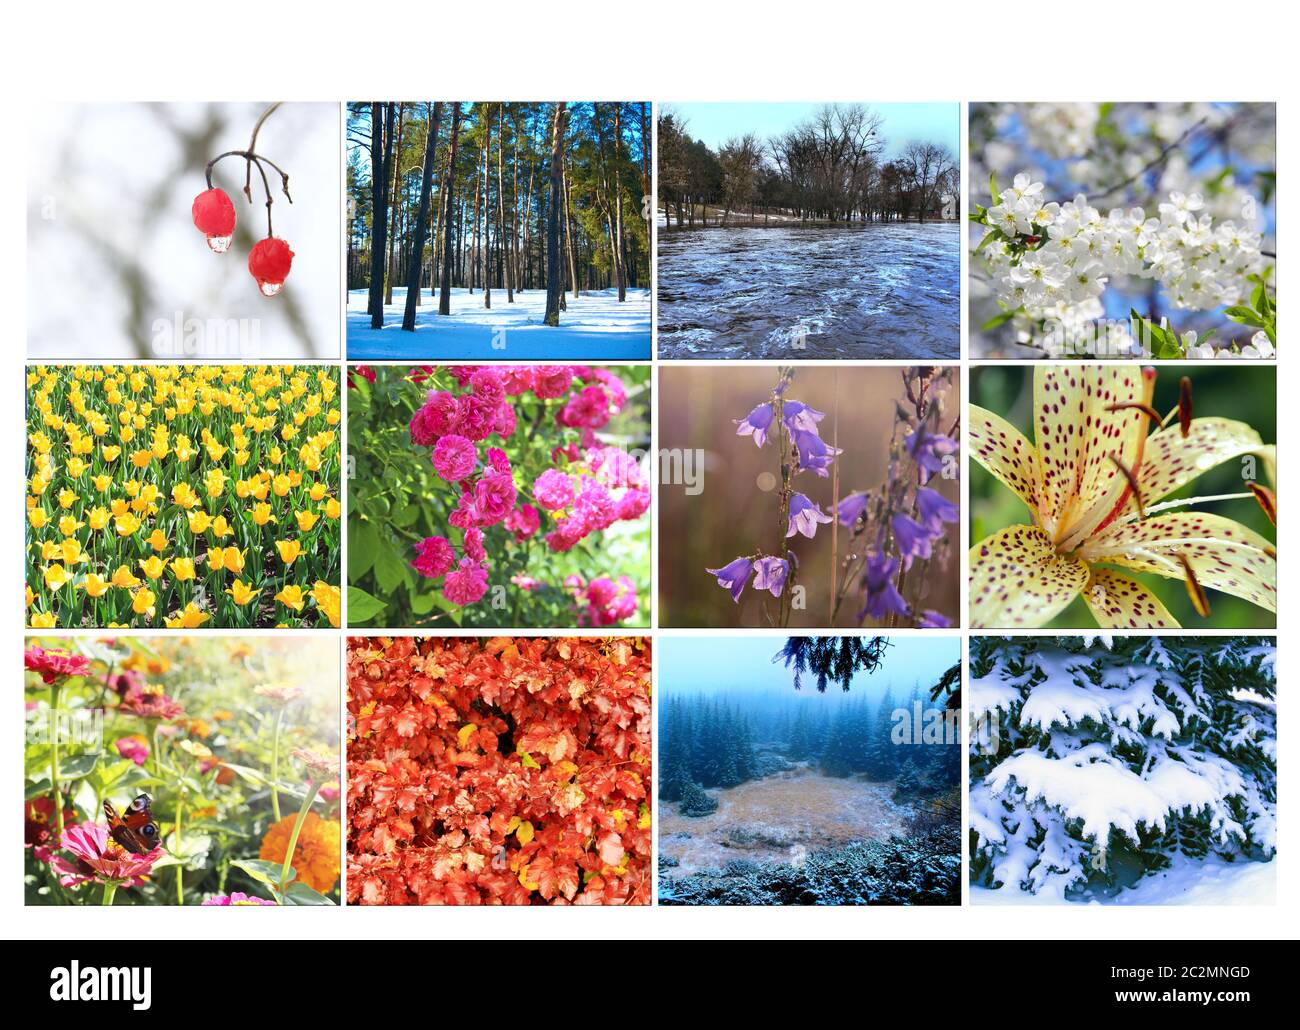 Blank with different twelve colored images of nature for calendar. Ready photo for calendar Stock Photo